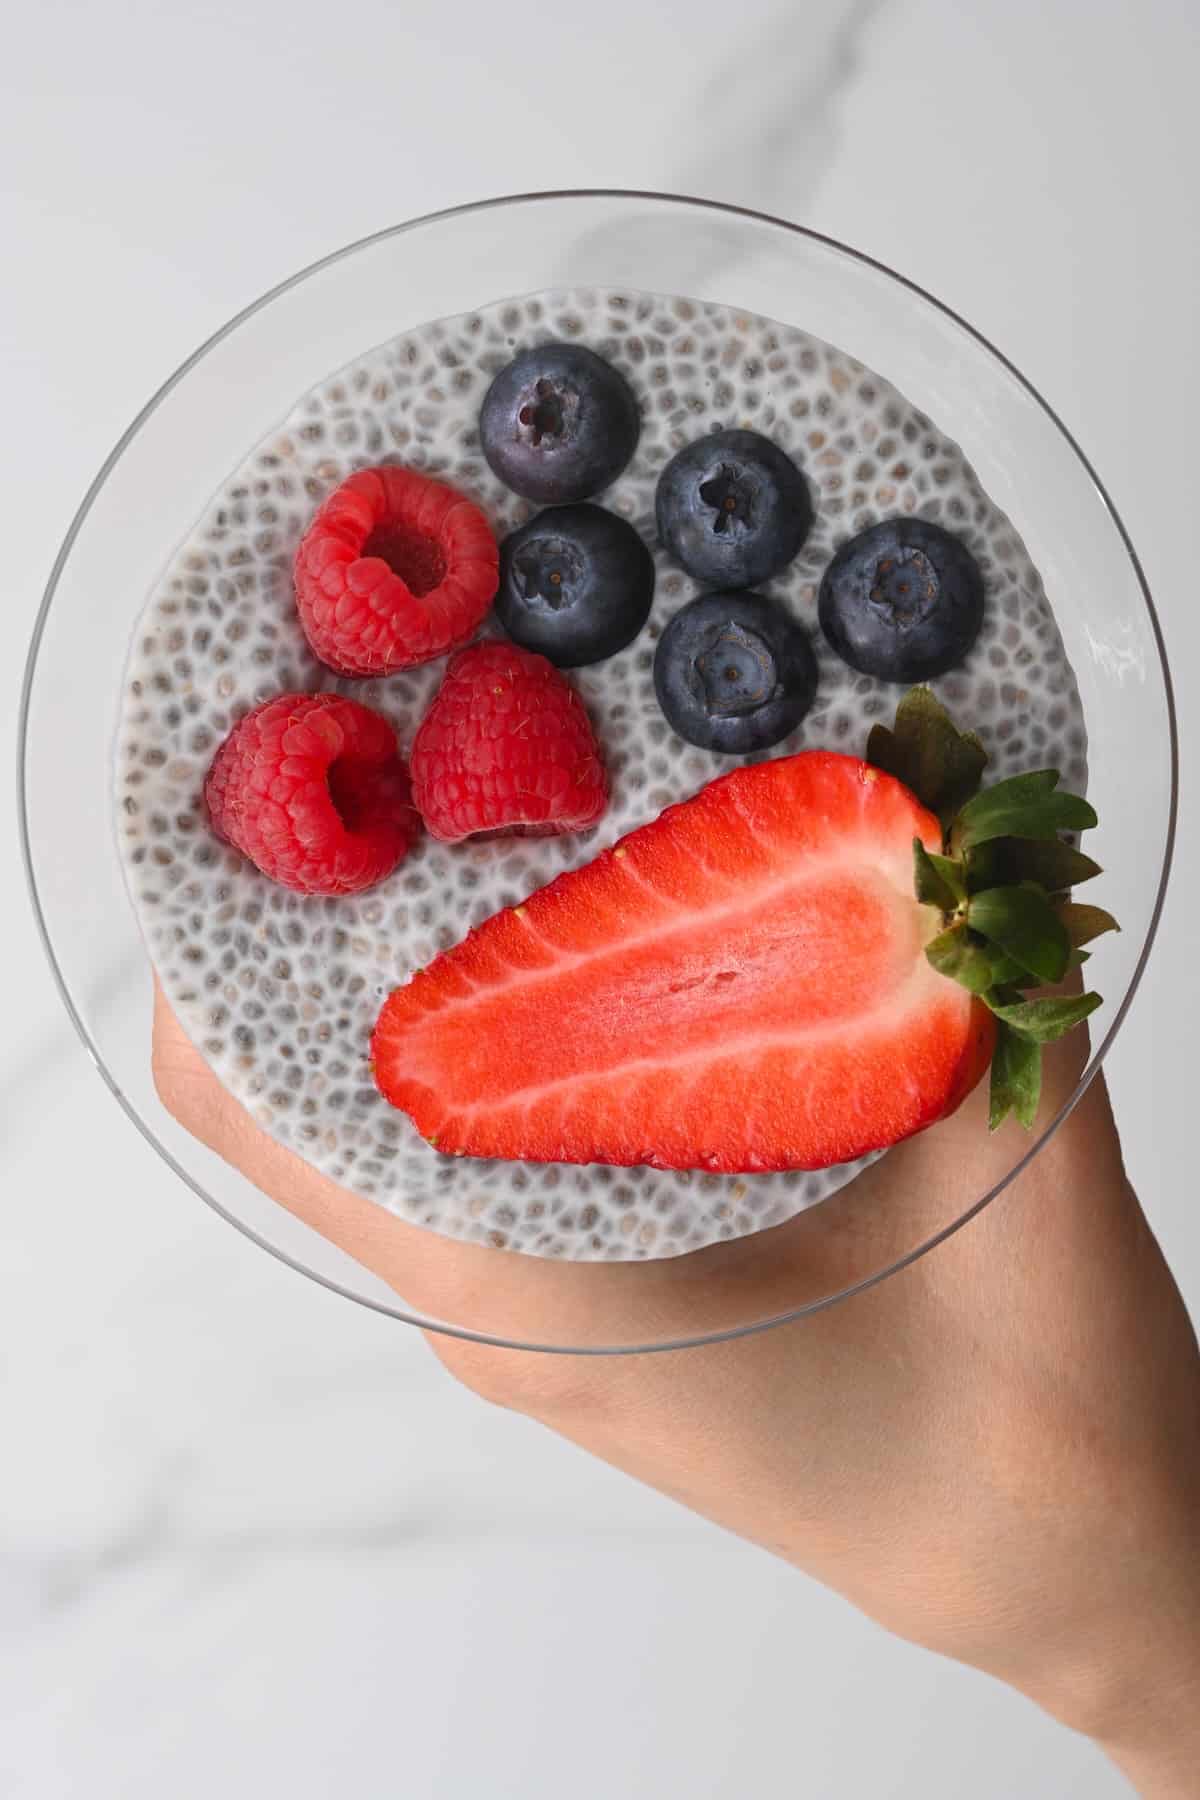 Chia pudding topped with mixed berries